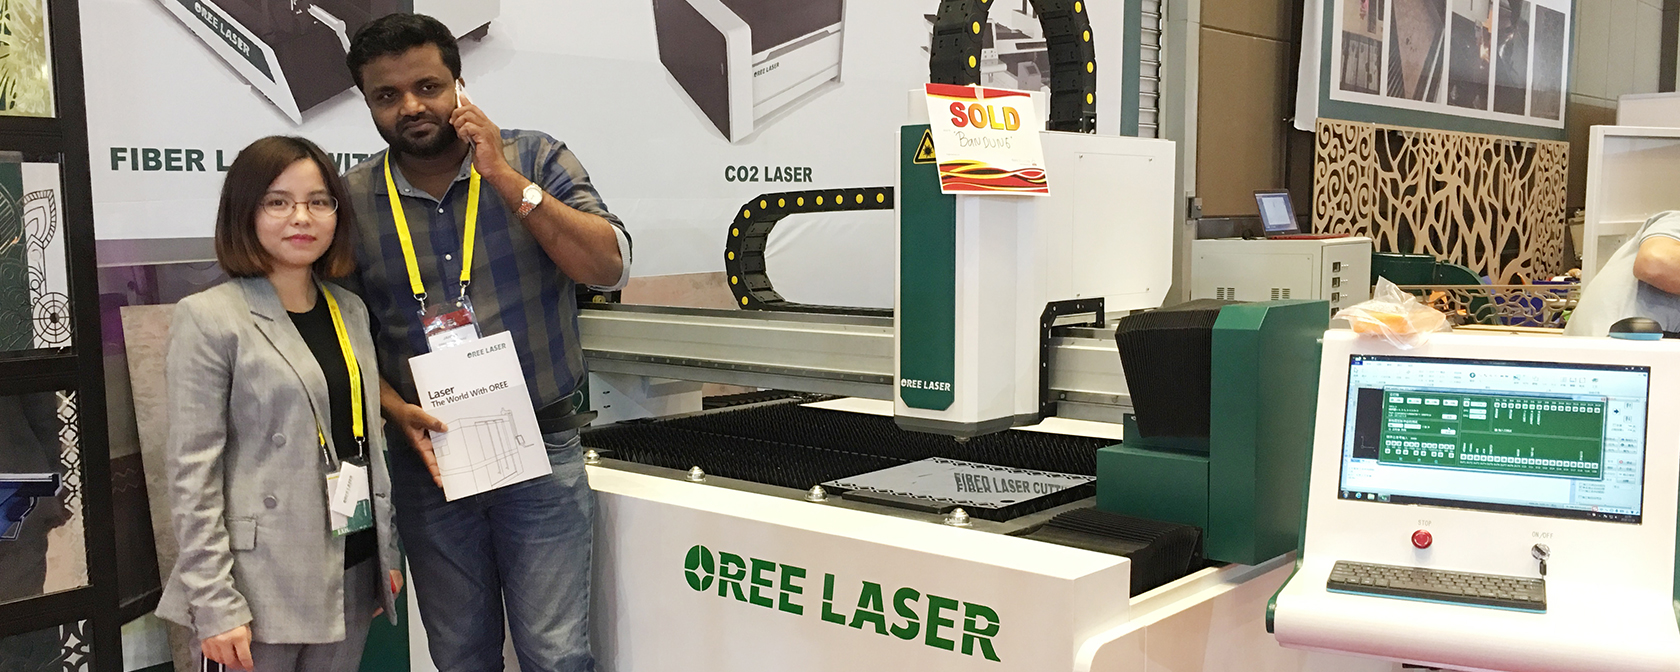  Oree laser is at All print Indonesia